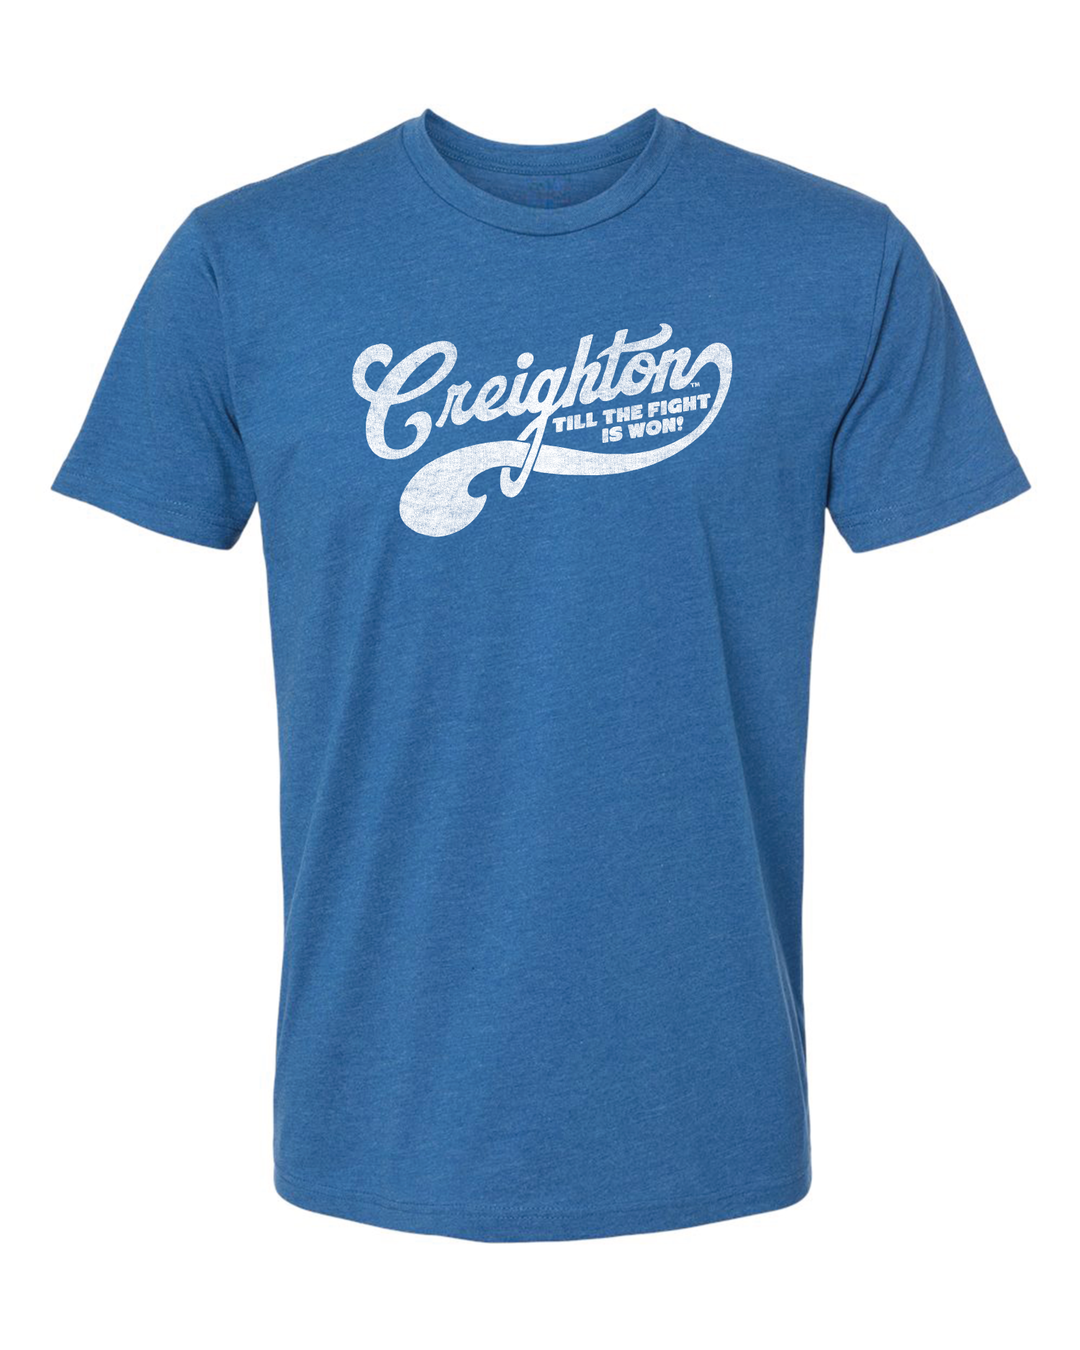 Vintage Blue Creighton T Shirt Till the Fight is Won